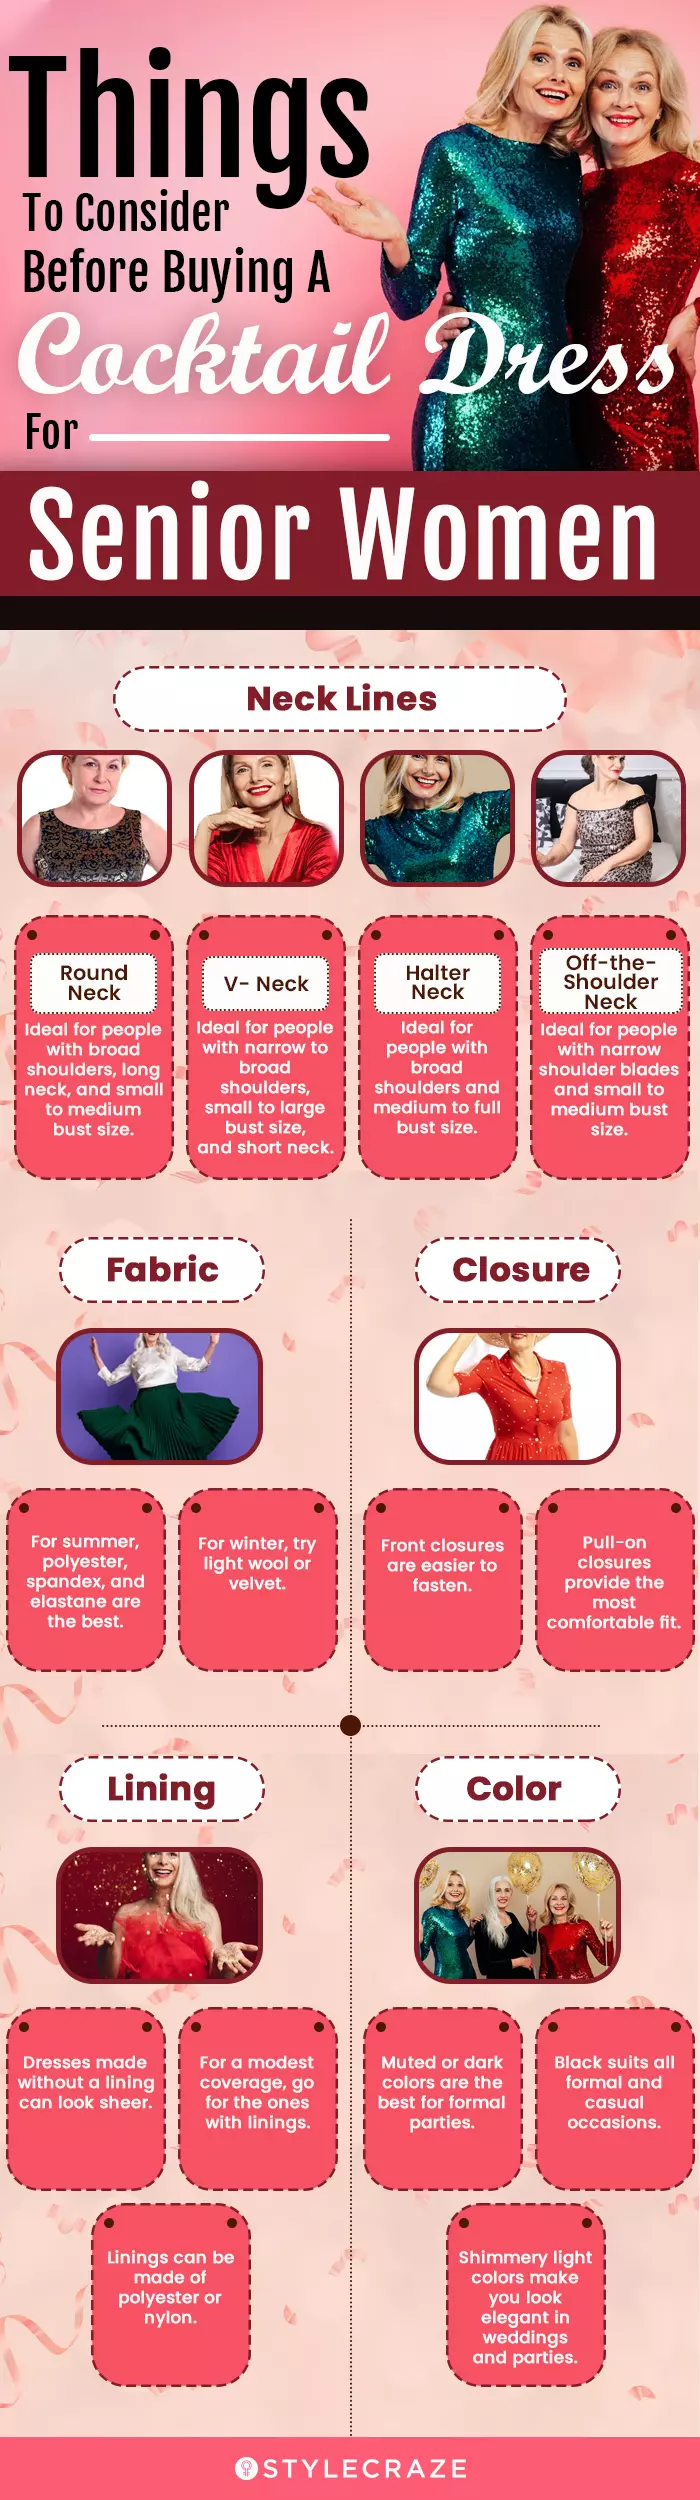 Things To Consider Before Buying A Cocktail Dress For Senior Women (infographic)